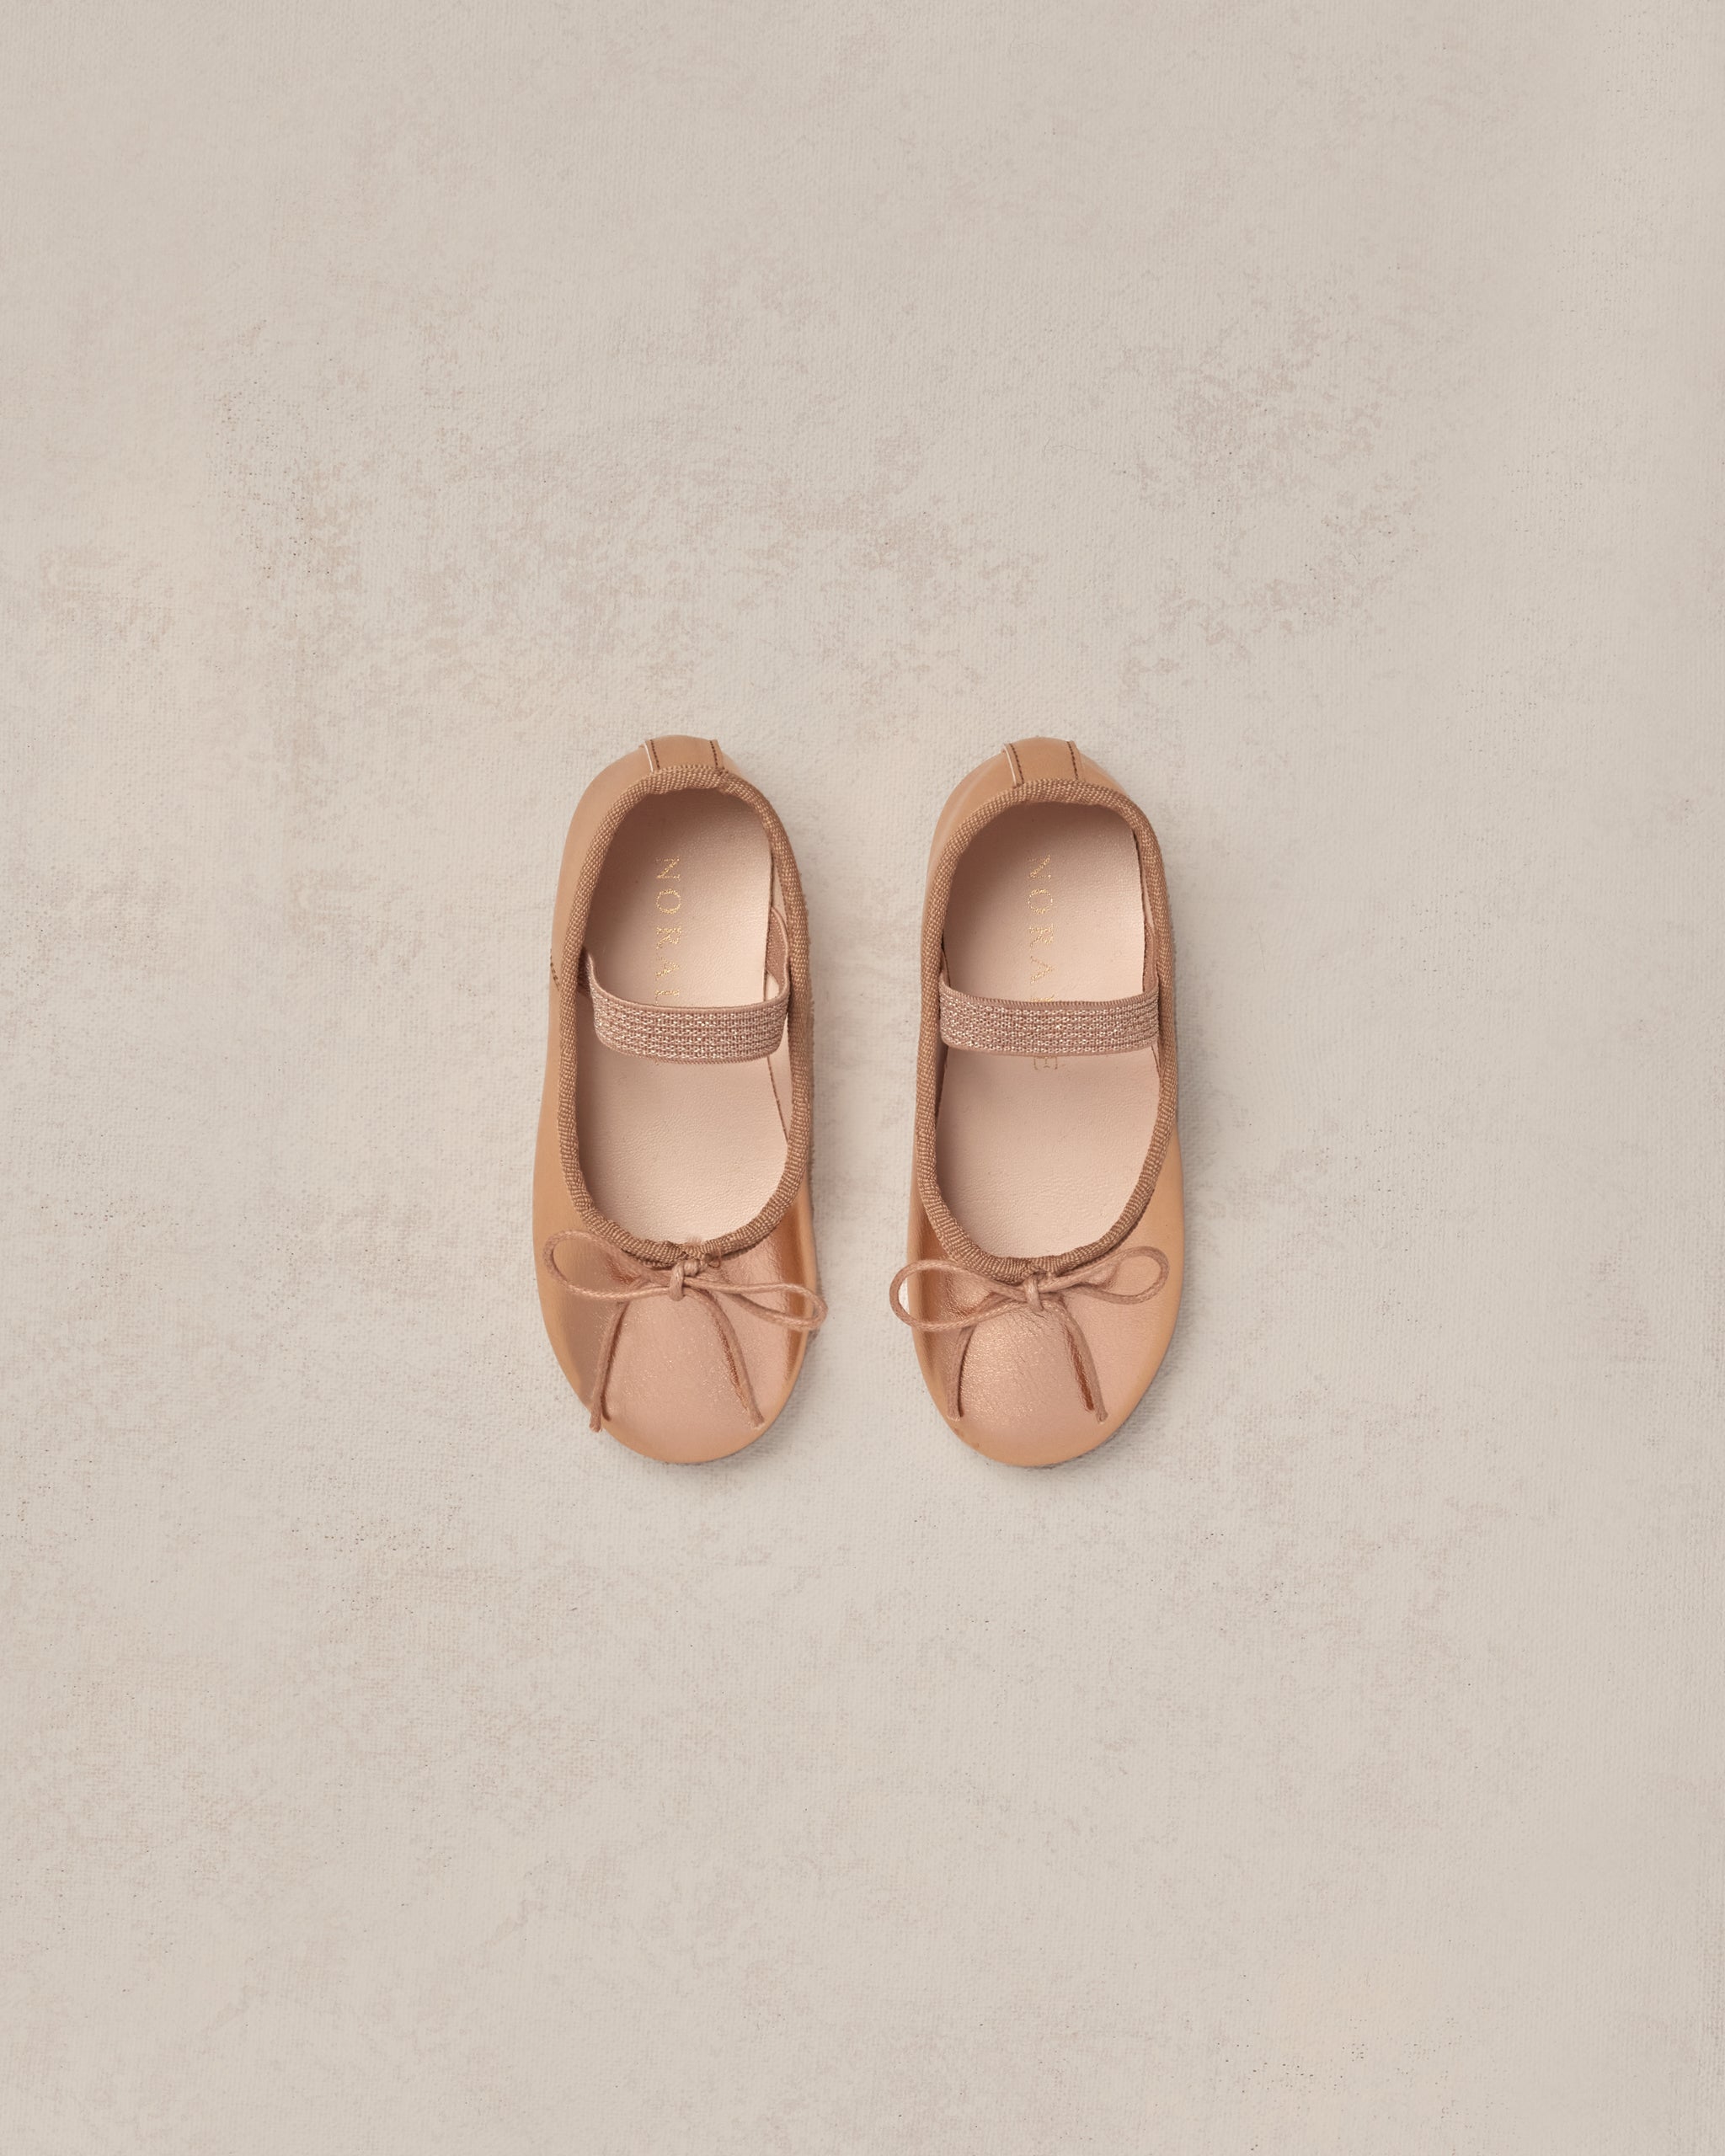 Ballet Flats || Mocha Metallic - Rylee + Cru | Kids Clothes | Trendy Baby Clothes | Modern Infant Outfits |